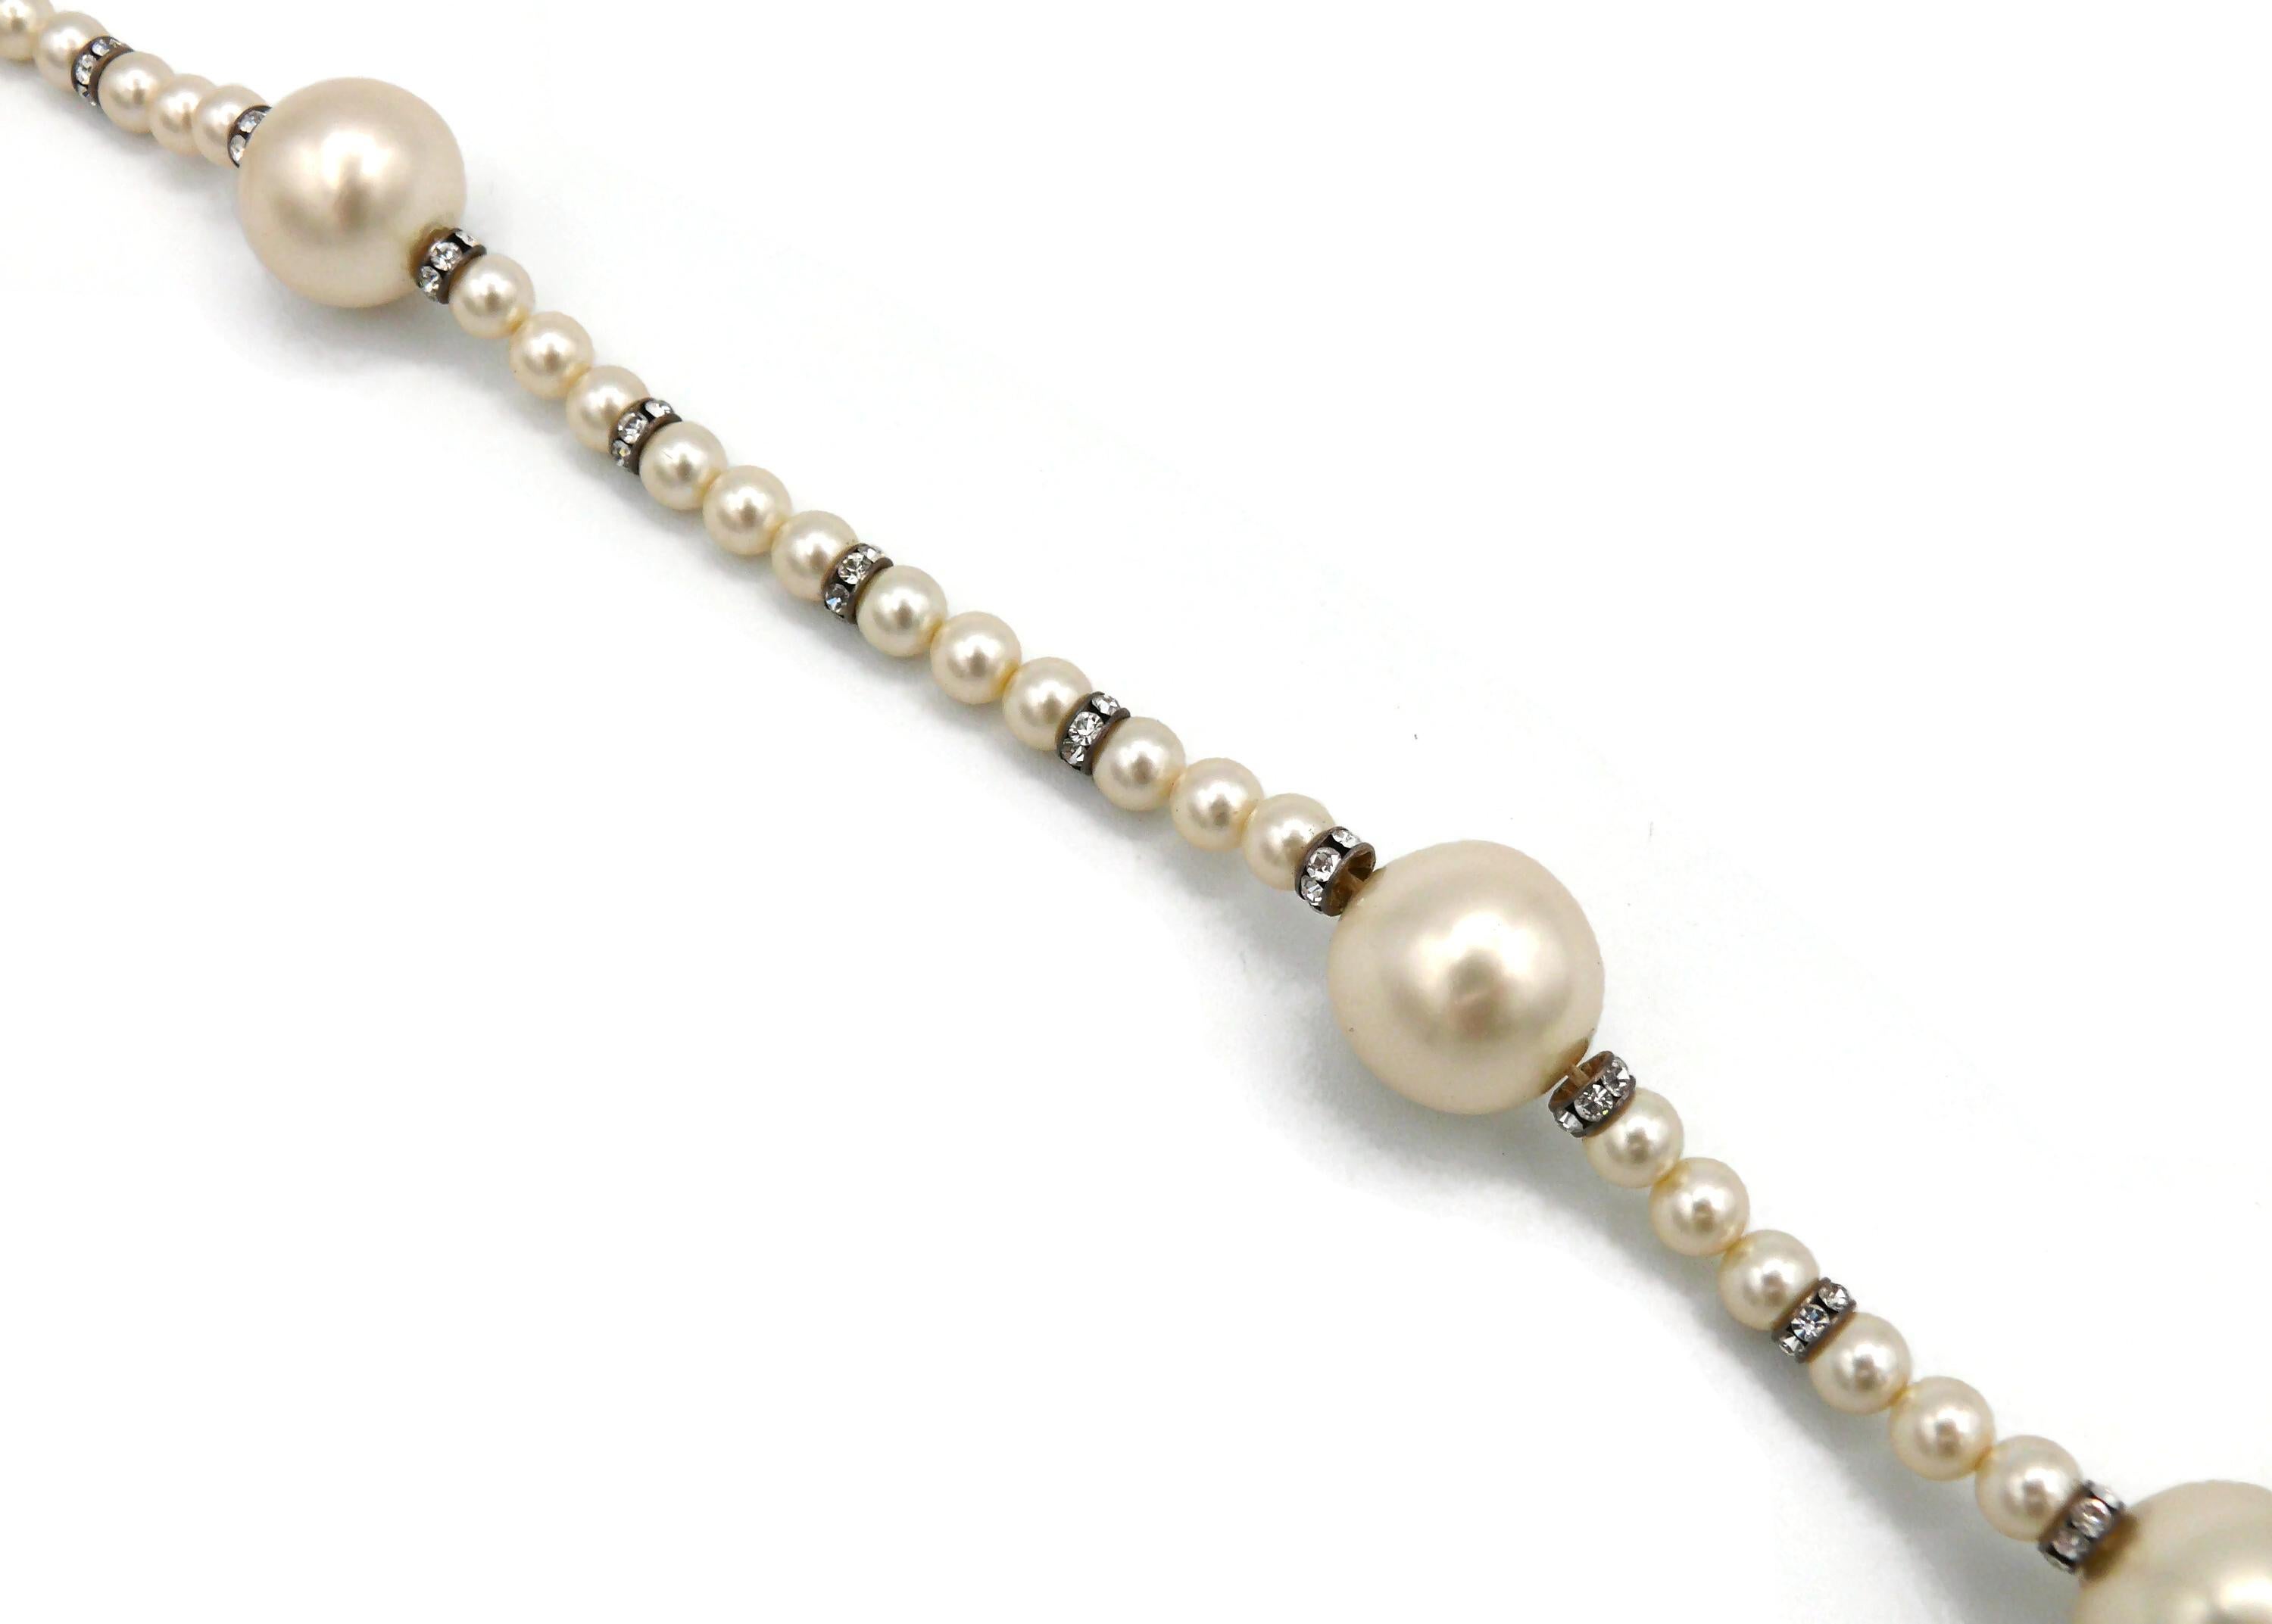 CHANEL by KARL LAGERFELD Vintage Faux Pearl and Crystal Necklace, Fall 1993 For Sale 3